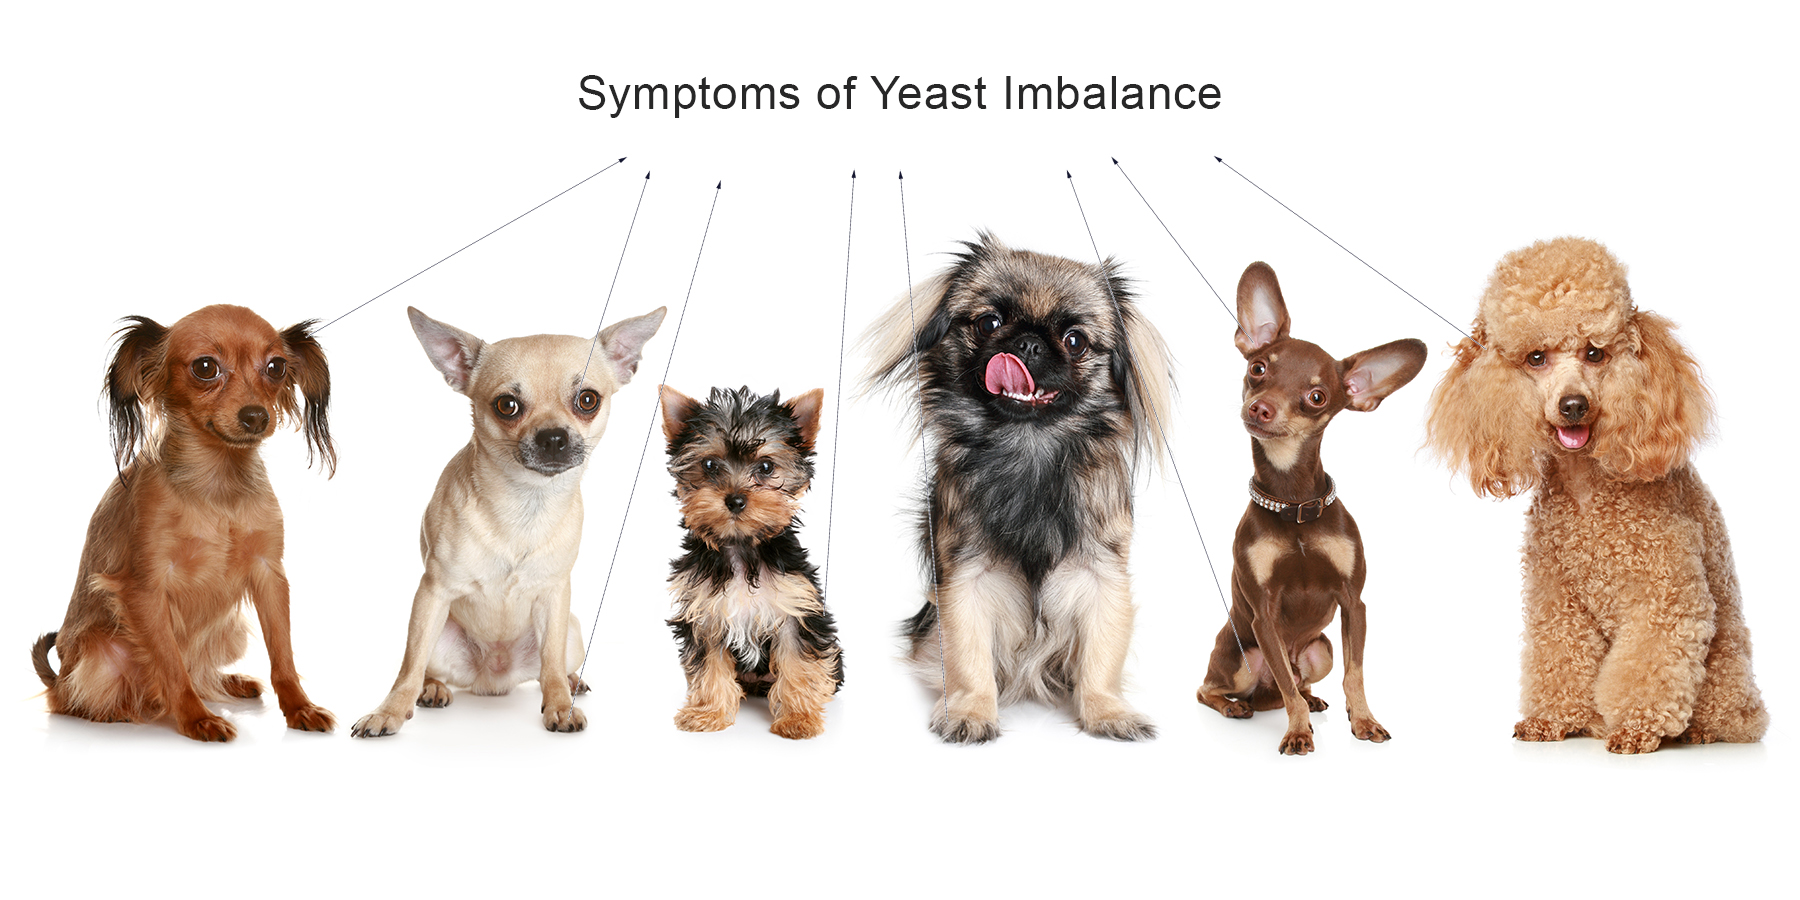 Image of small dogs with arrows that point to "Symptoms of Yeast Imbalance" 